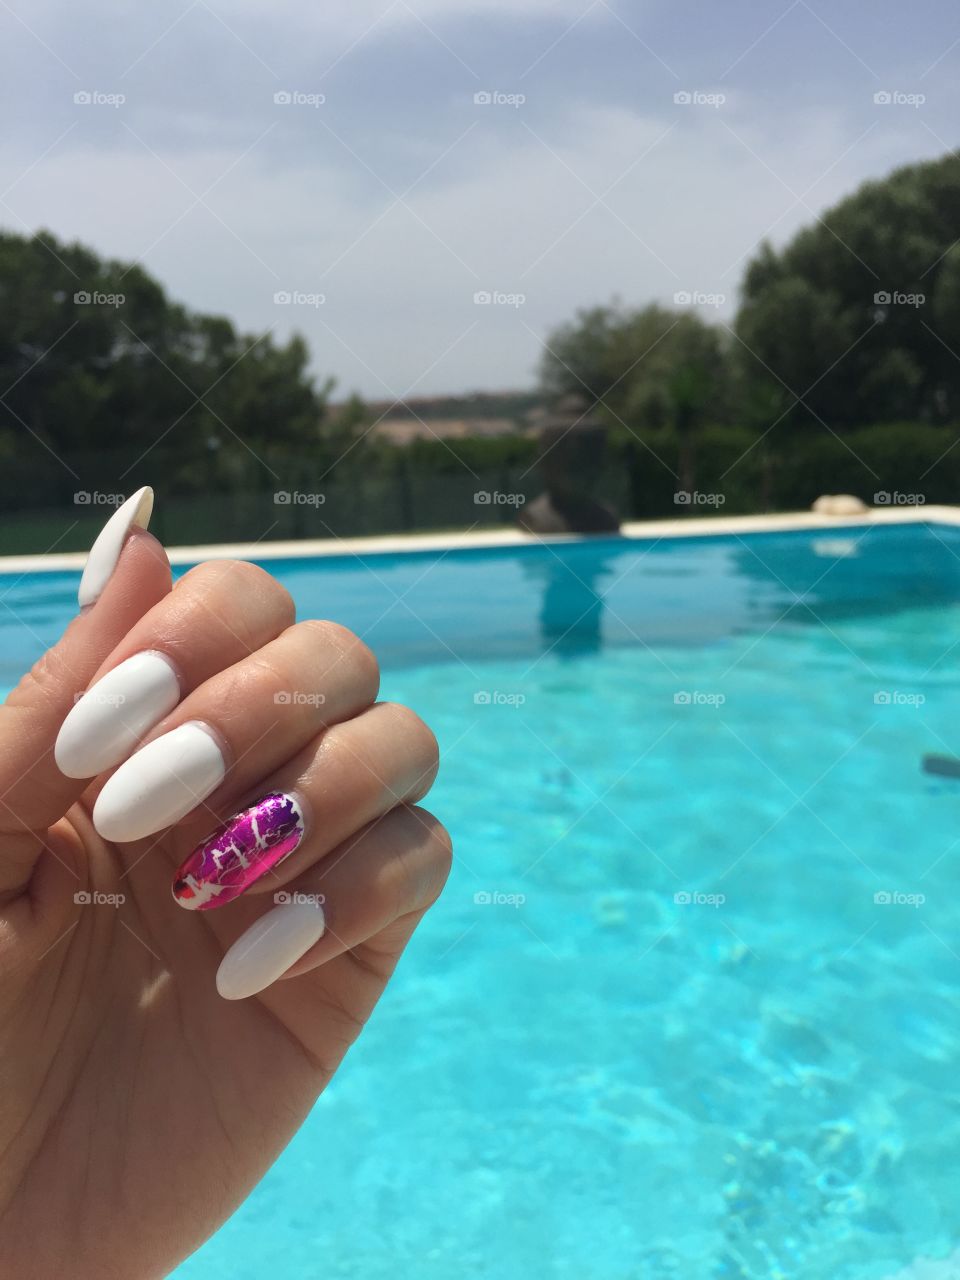 Girly nails. Took this photo from our country house poolside in Marbella. 